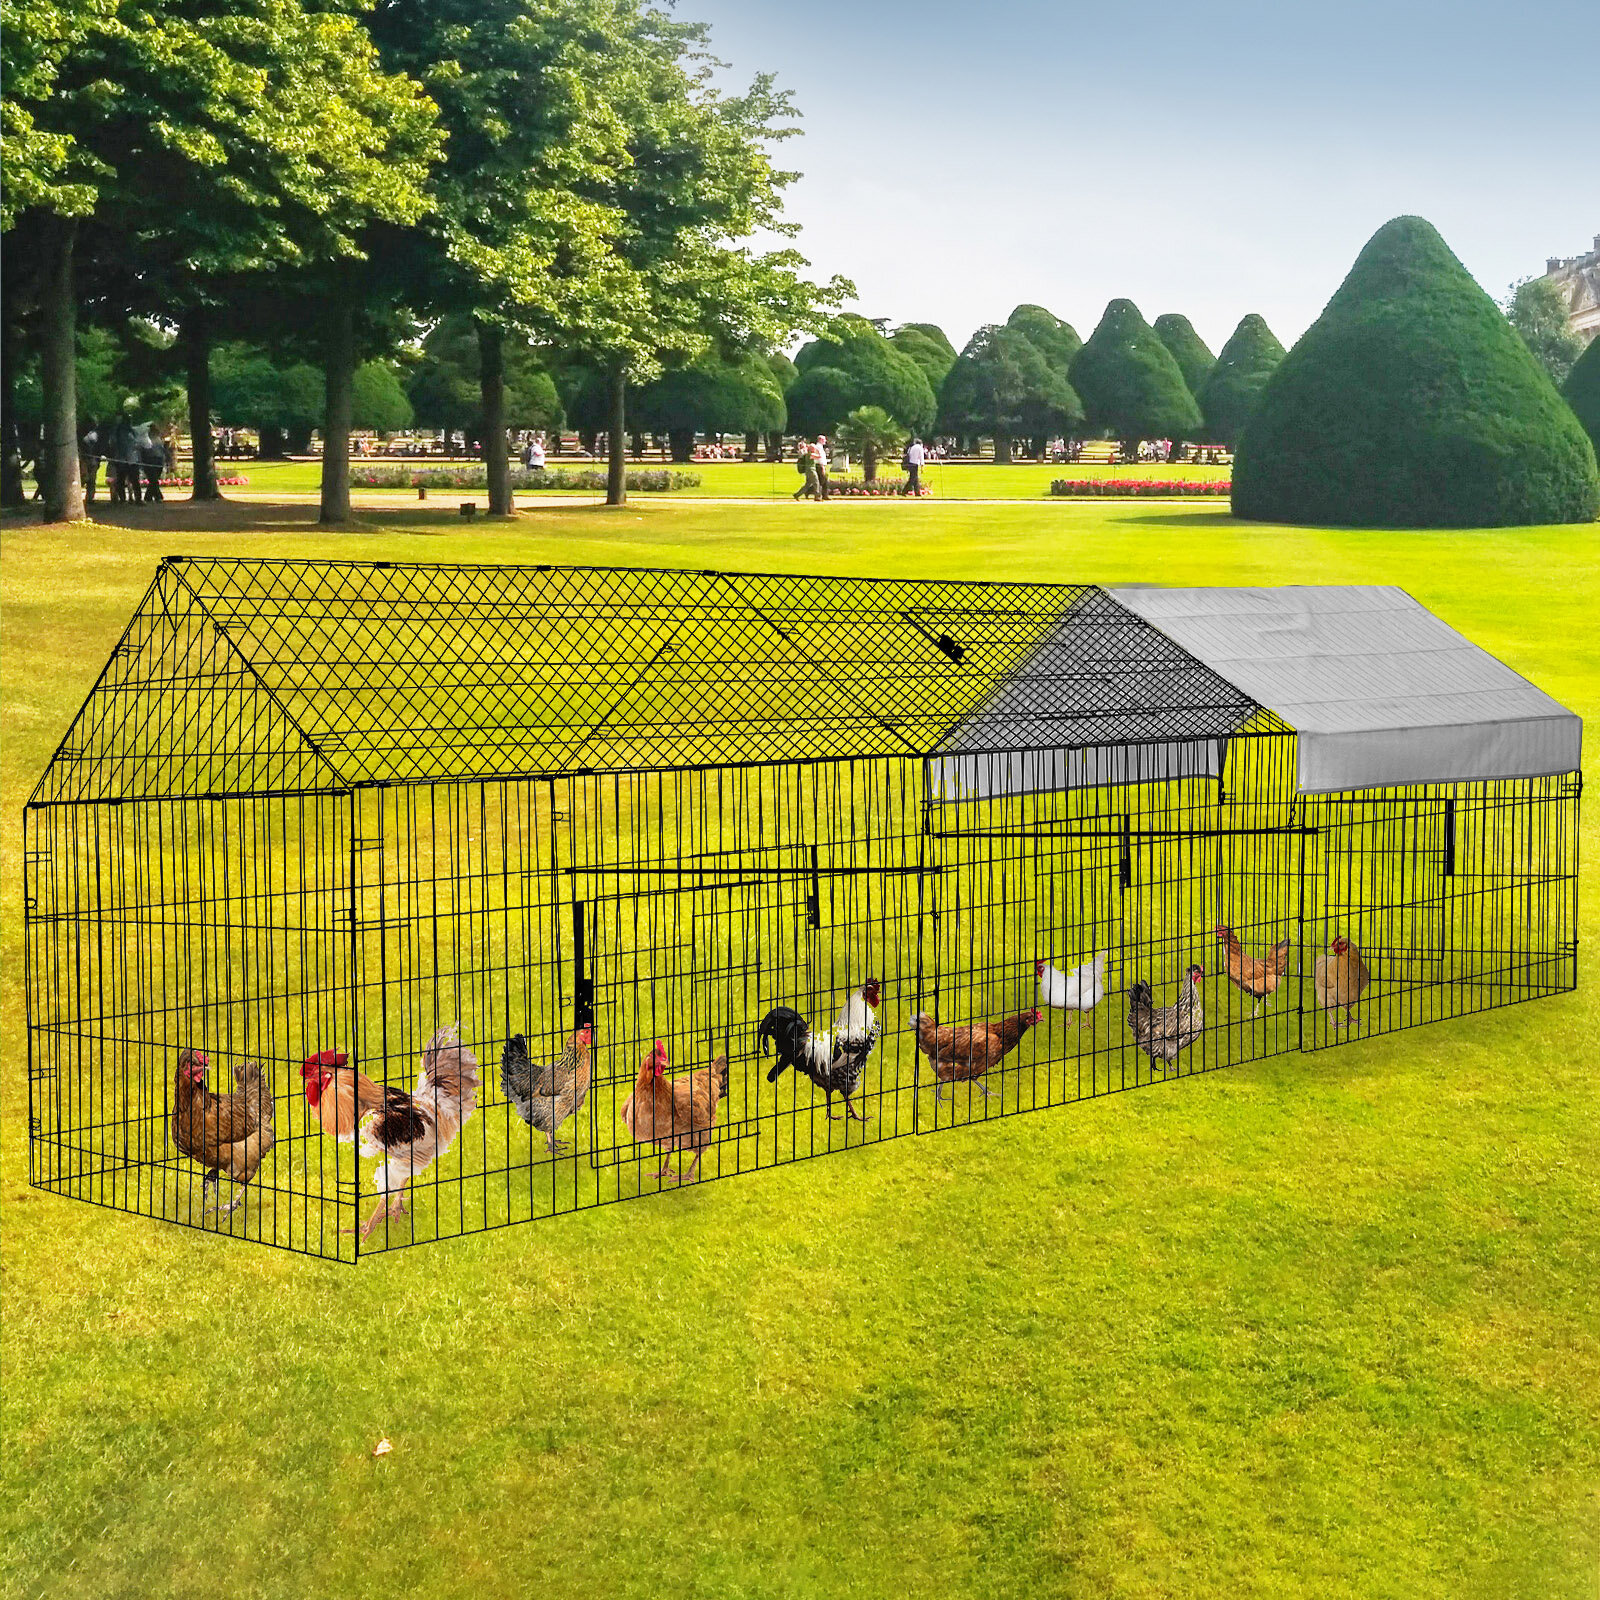 

PawGiant 130'' Poultry Chicken Coop Hen House Hutch Backyard Run Nesting Box Outdoor Cage